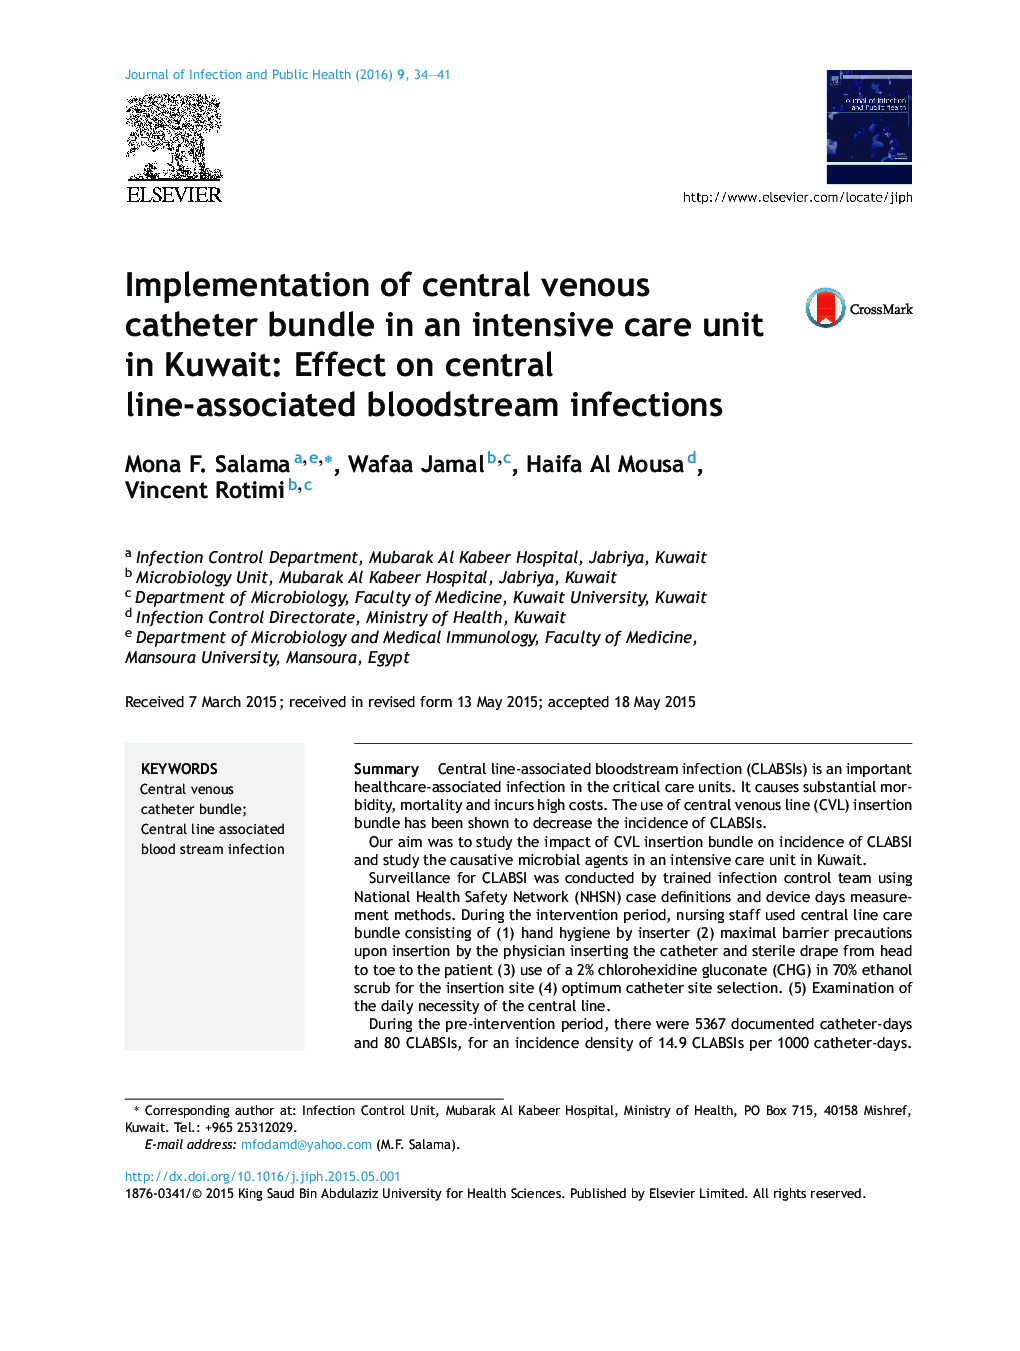 Implementation of central venous catheter bundle in an intensive care unit in Kuwait: Effect on central line-associated bloodstream infections